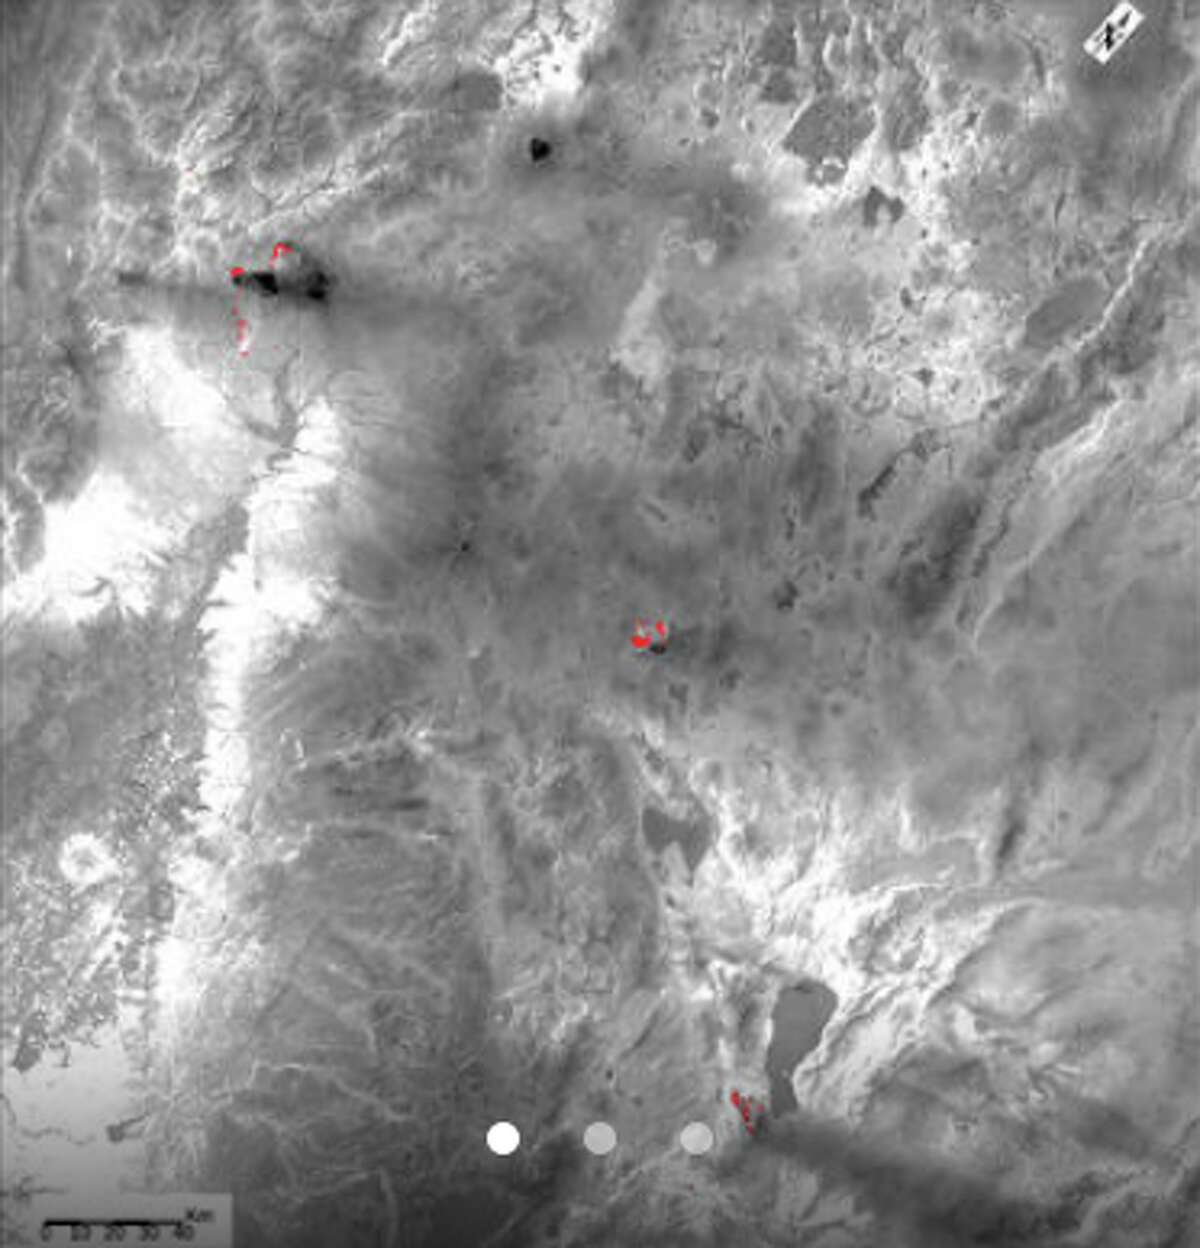 ECOSTRESS image acquired on July 28 shows three wildfires burning in the western US (in red) -- the Carr and Whaleback fires in California, and the Perry Fire in Nevada.